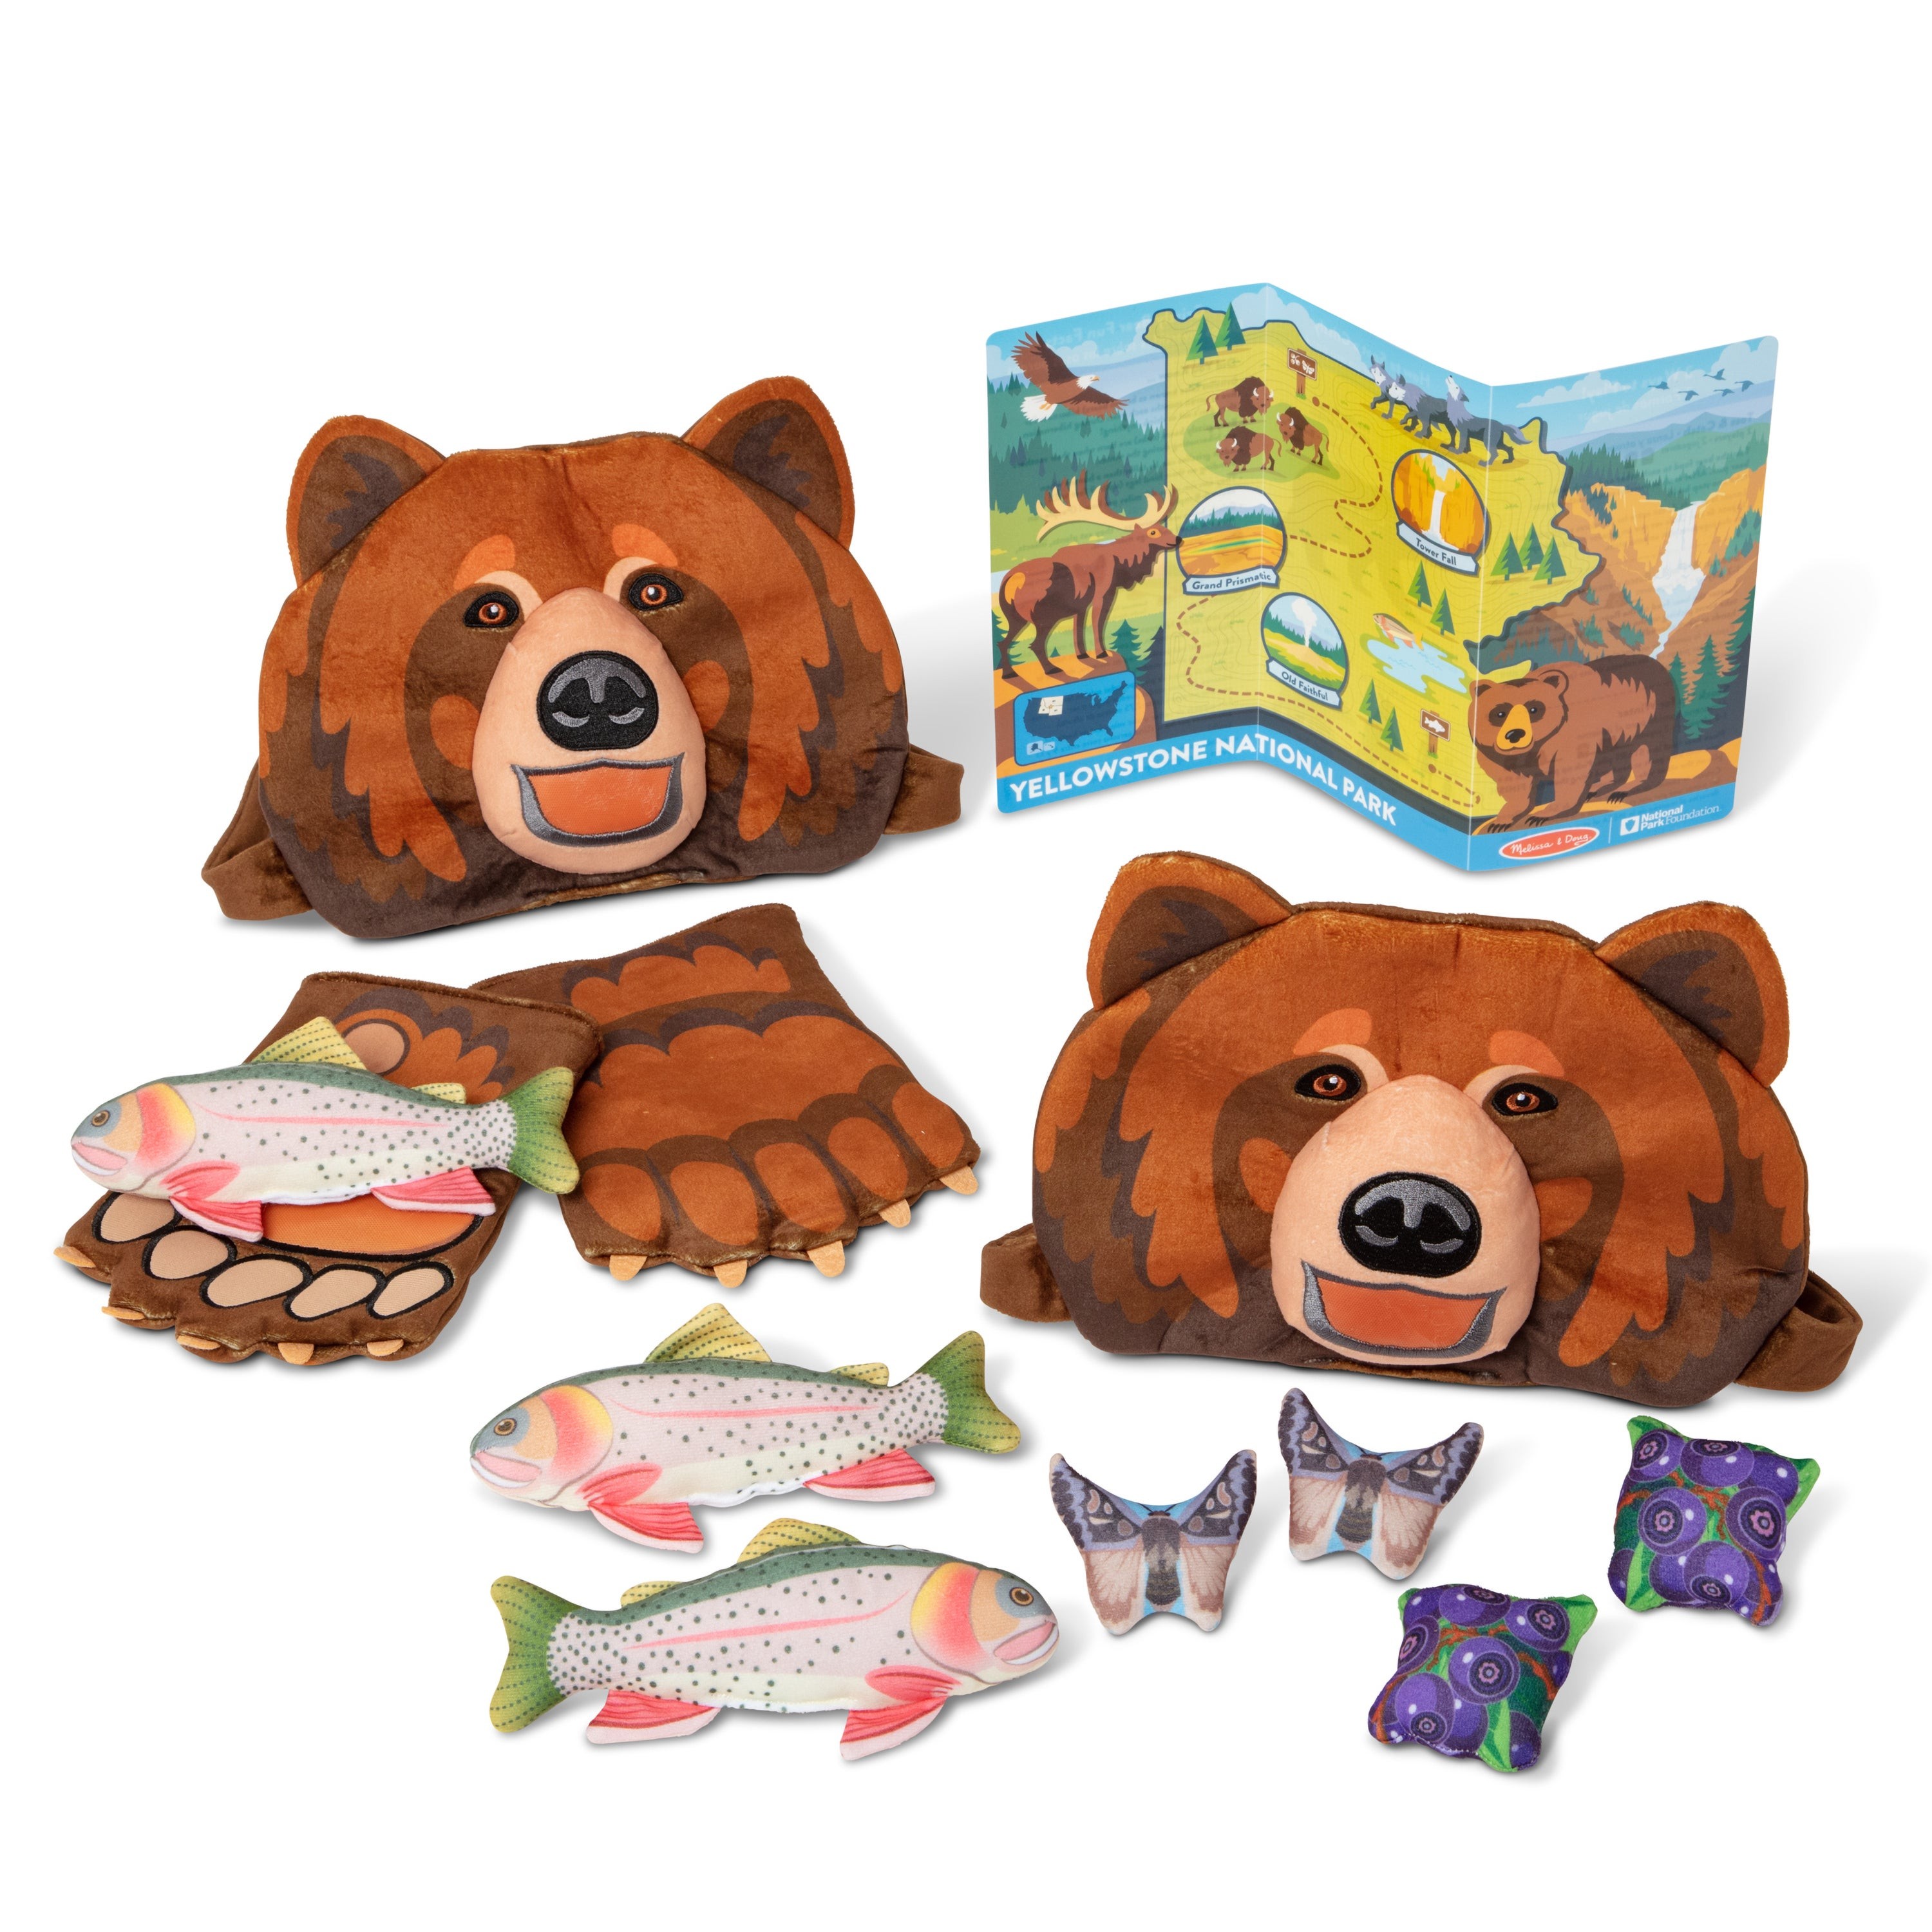 Yellowstone National Park Grizzly Bear Games Ages 3+ Years